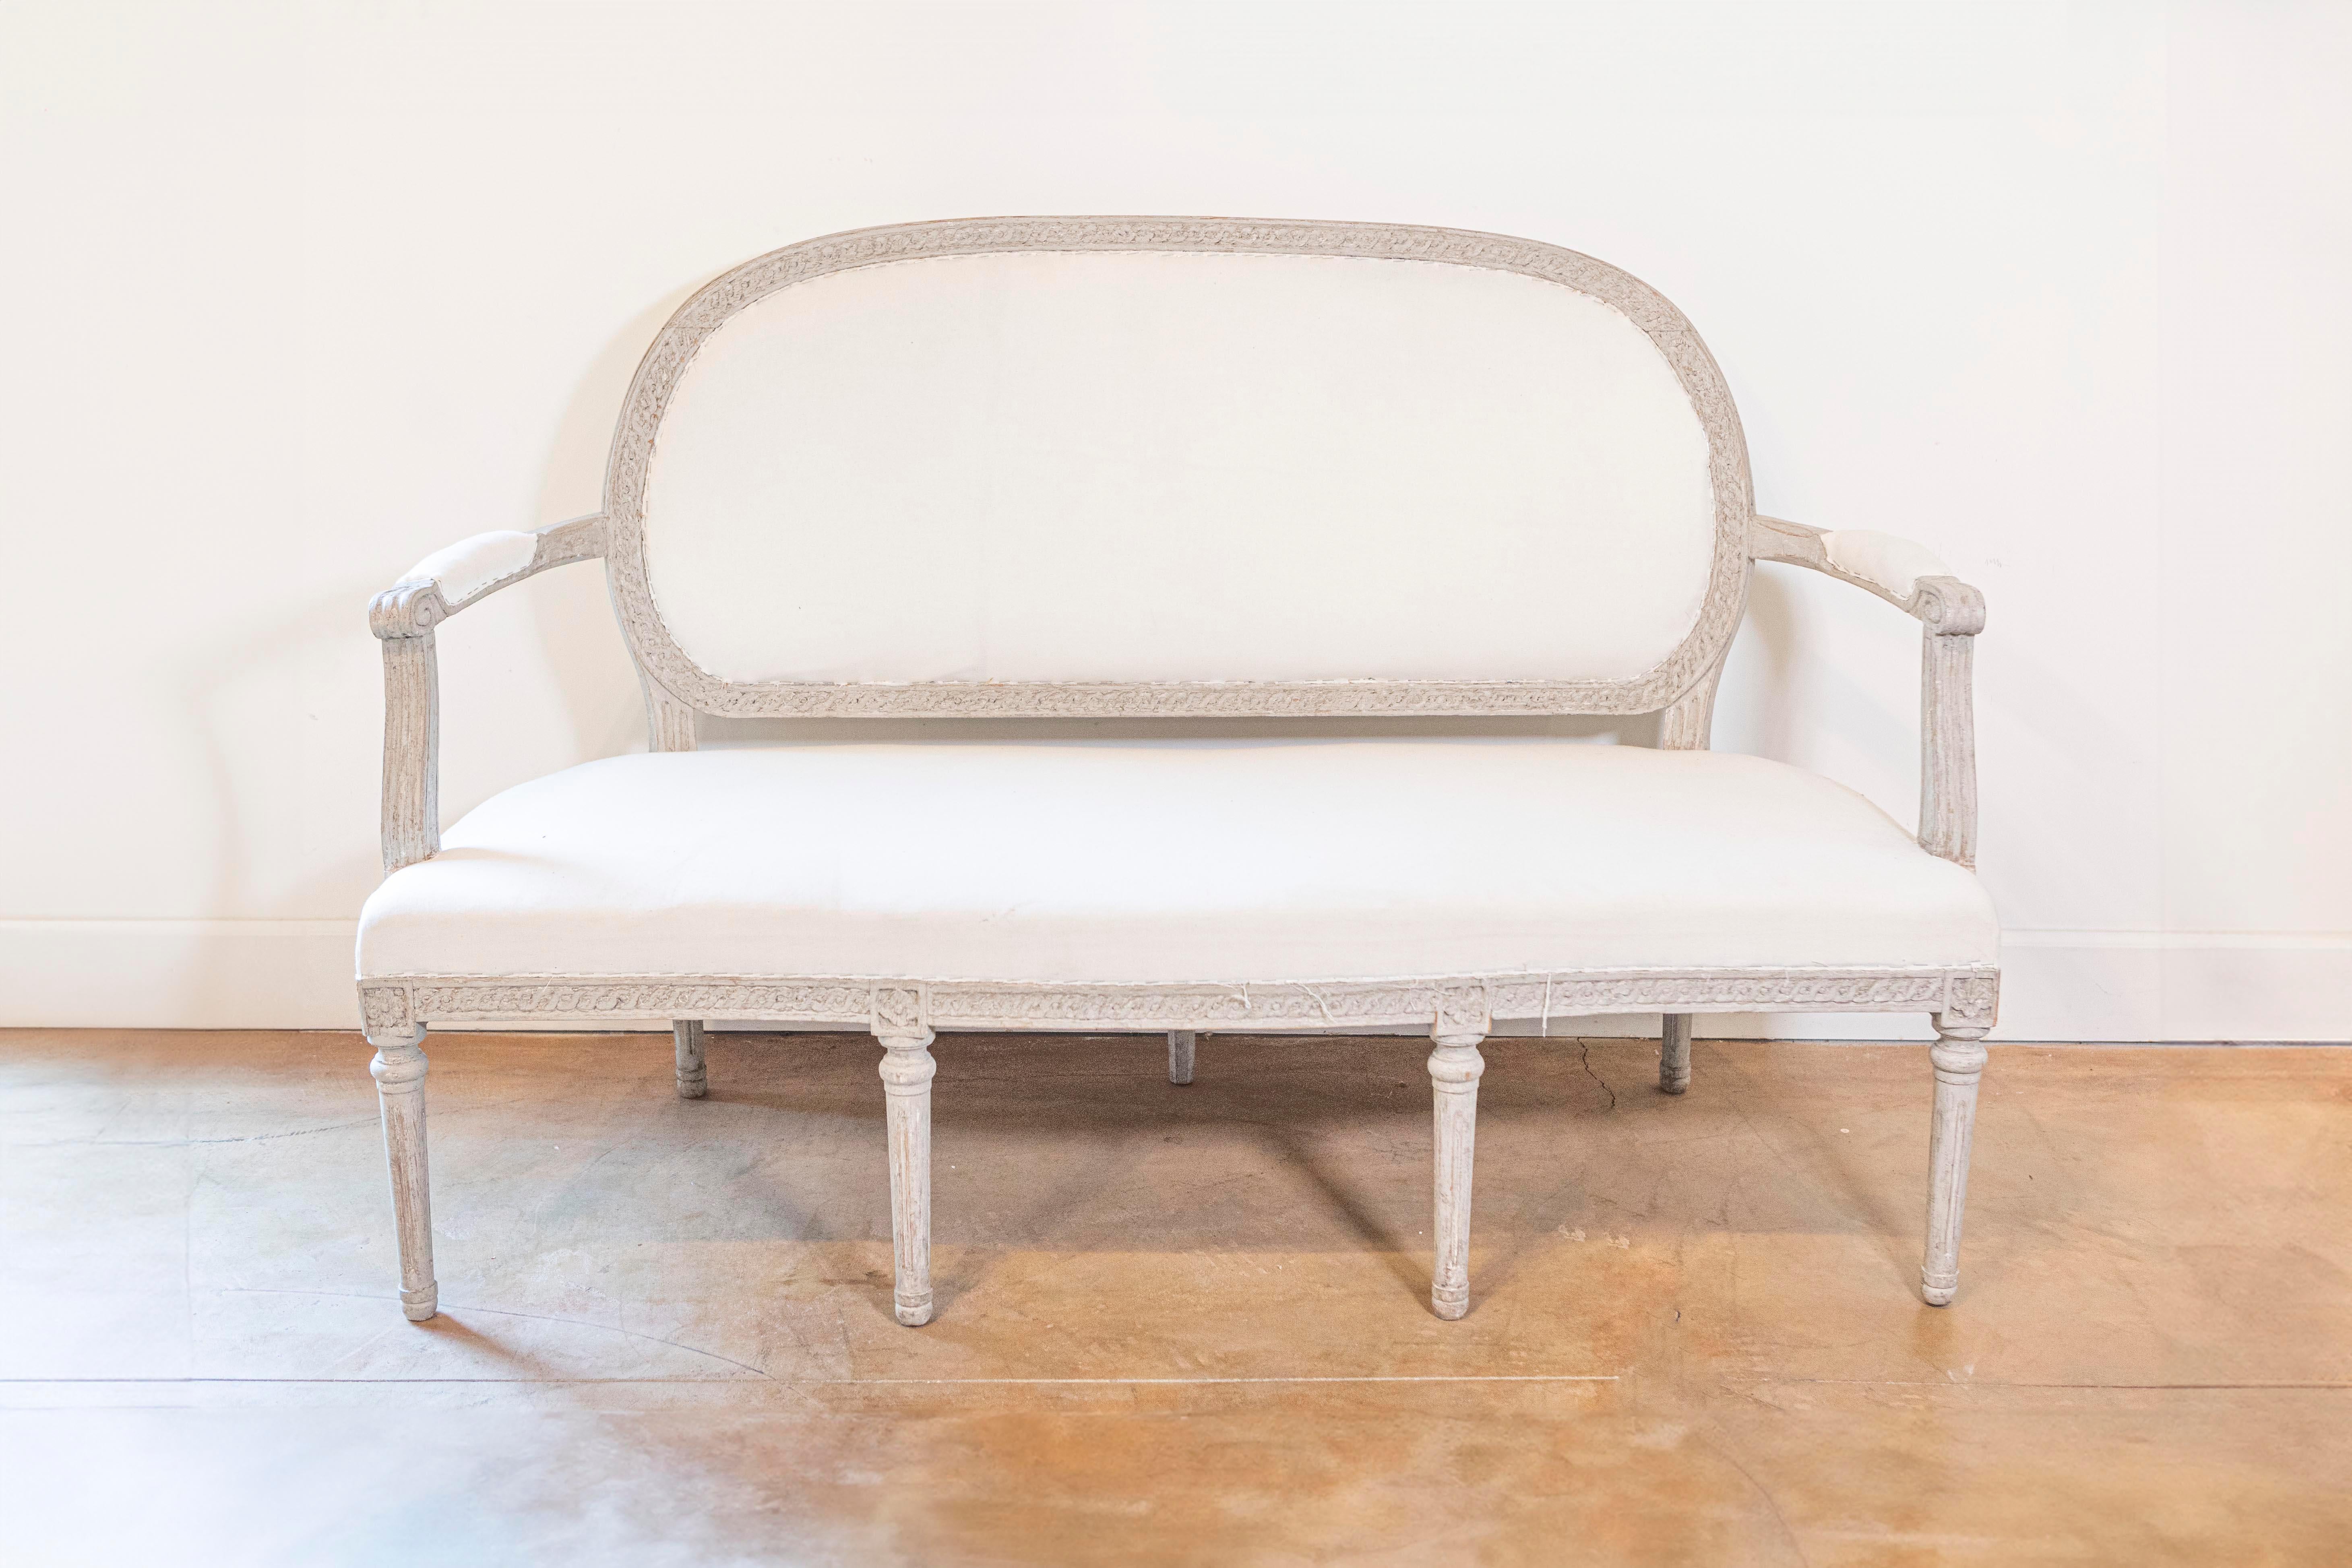 A Swedish Neoclassical period painted wood sofa circa 1780 with oval back, carved guilloche frieze, scrolling arms, seven legs and carved rosettes. Celebrate the classical elegance with this exquisite Swedish Neoclassical period painted wood sofa,